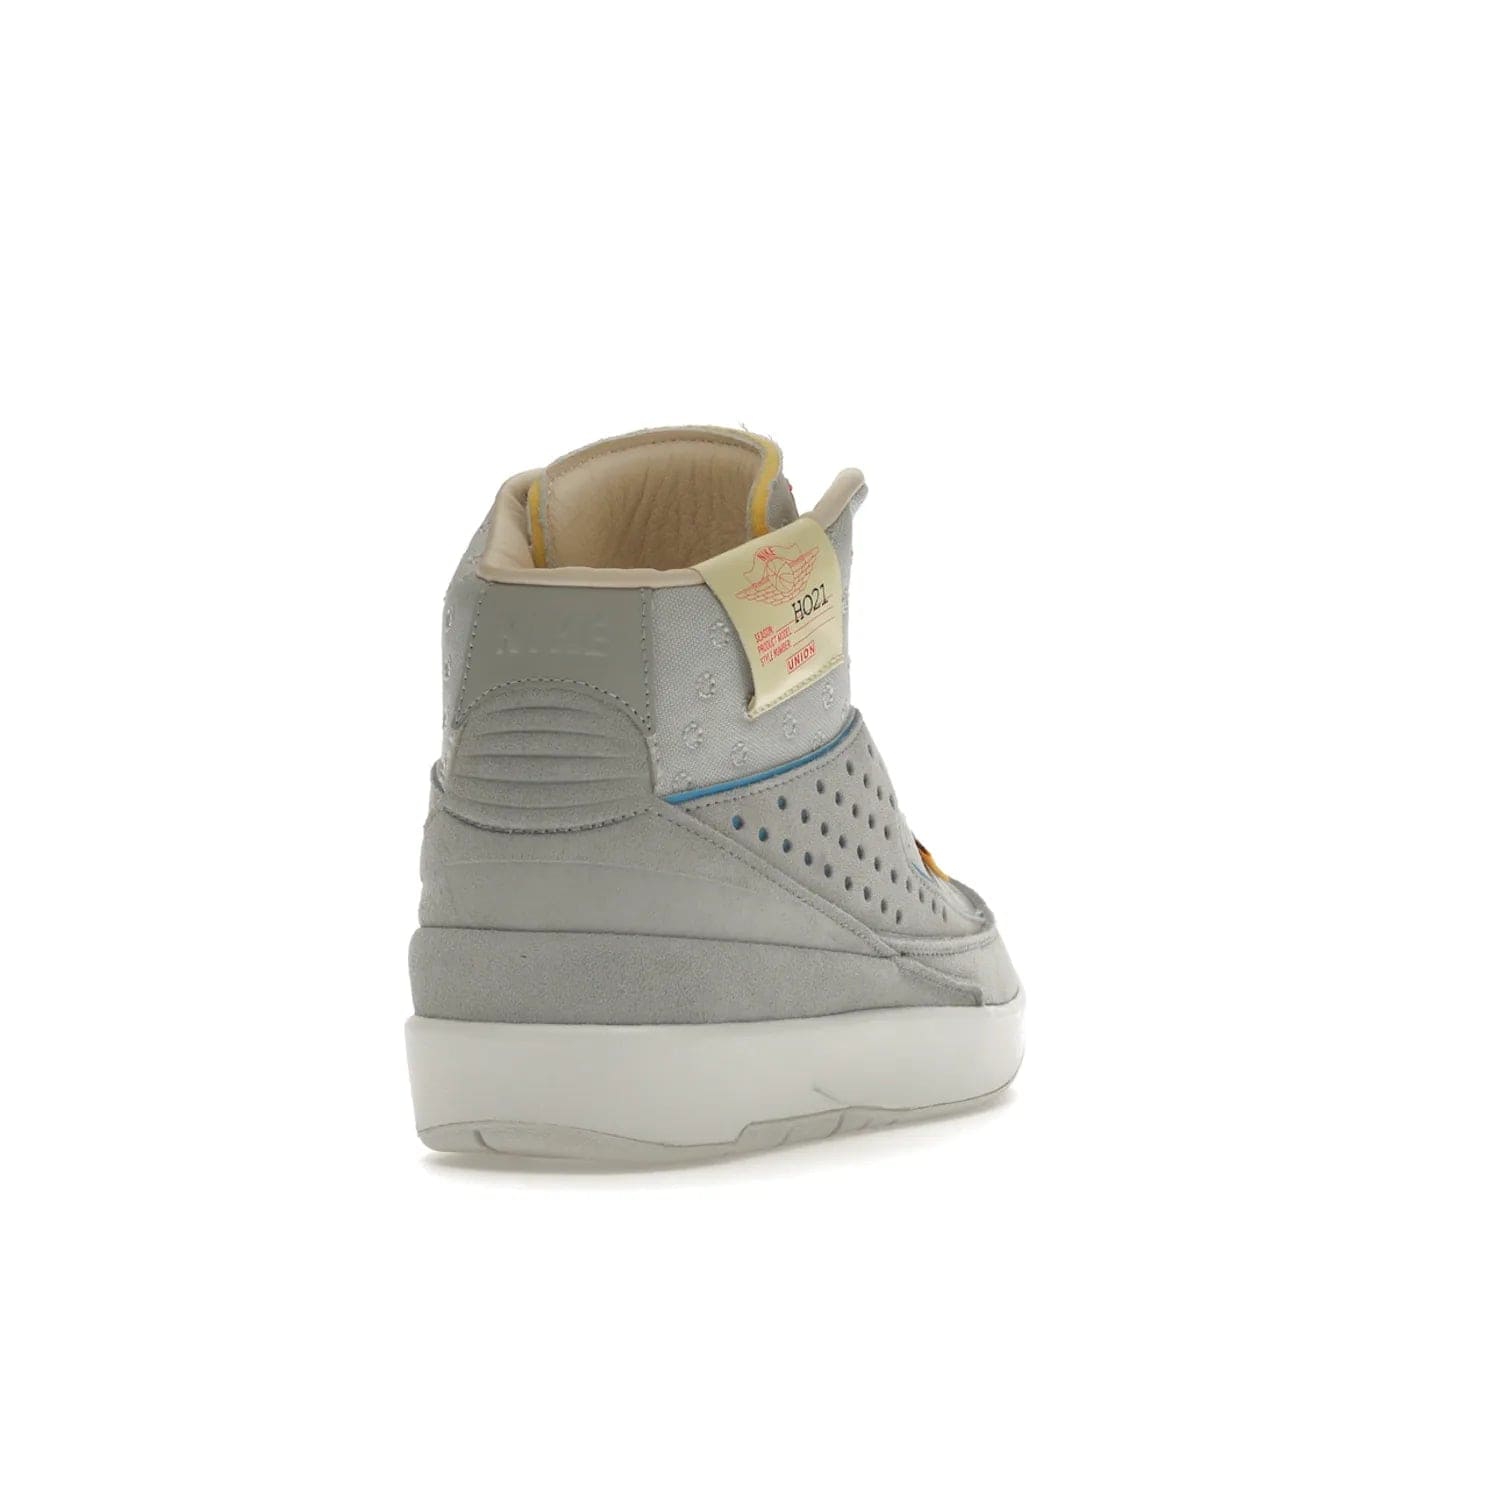 Jordan 2 Retro SP Union Grey Fog - Image 30 - Only at www.BallersClubKickz.com - Introducing the Air Jordan 2 Retro SP Union Grey Fog. This intricate sneaker design features a grey canvas upper with light blue eyelets, eyestay patches, and piping, plus custom external tags. Dropping in April 2022, this exclusive release offers a worn-in look and feel.